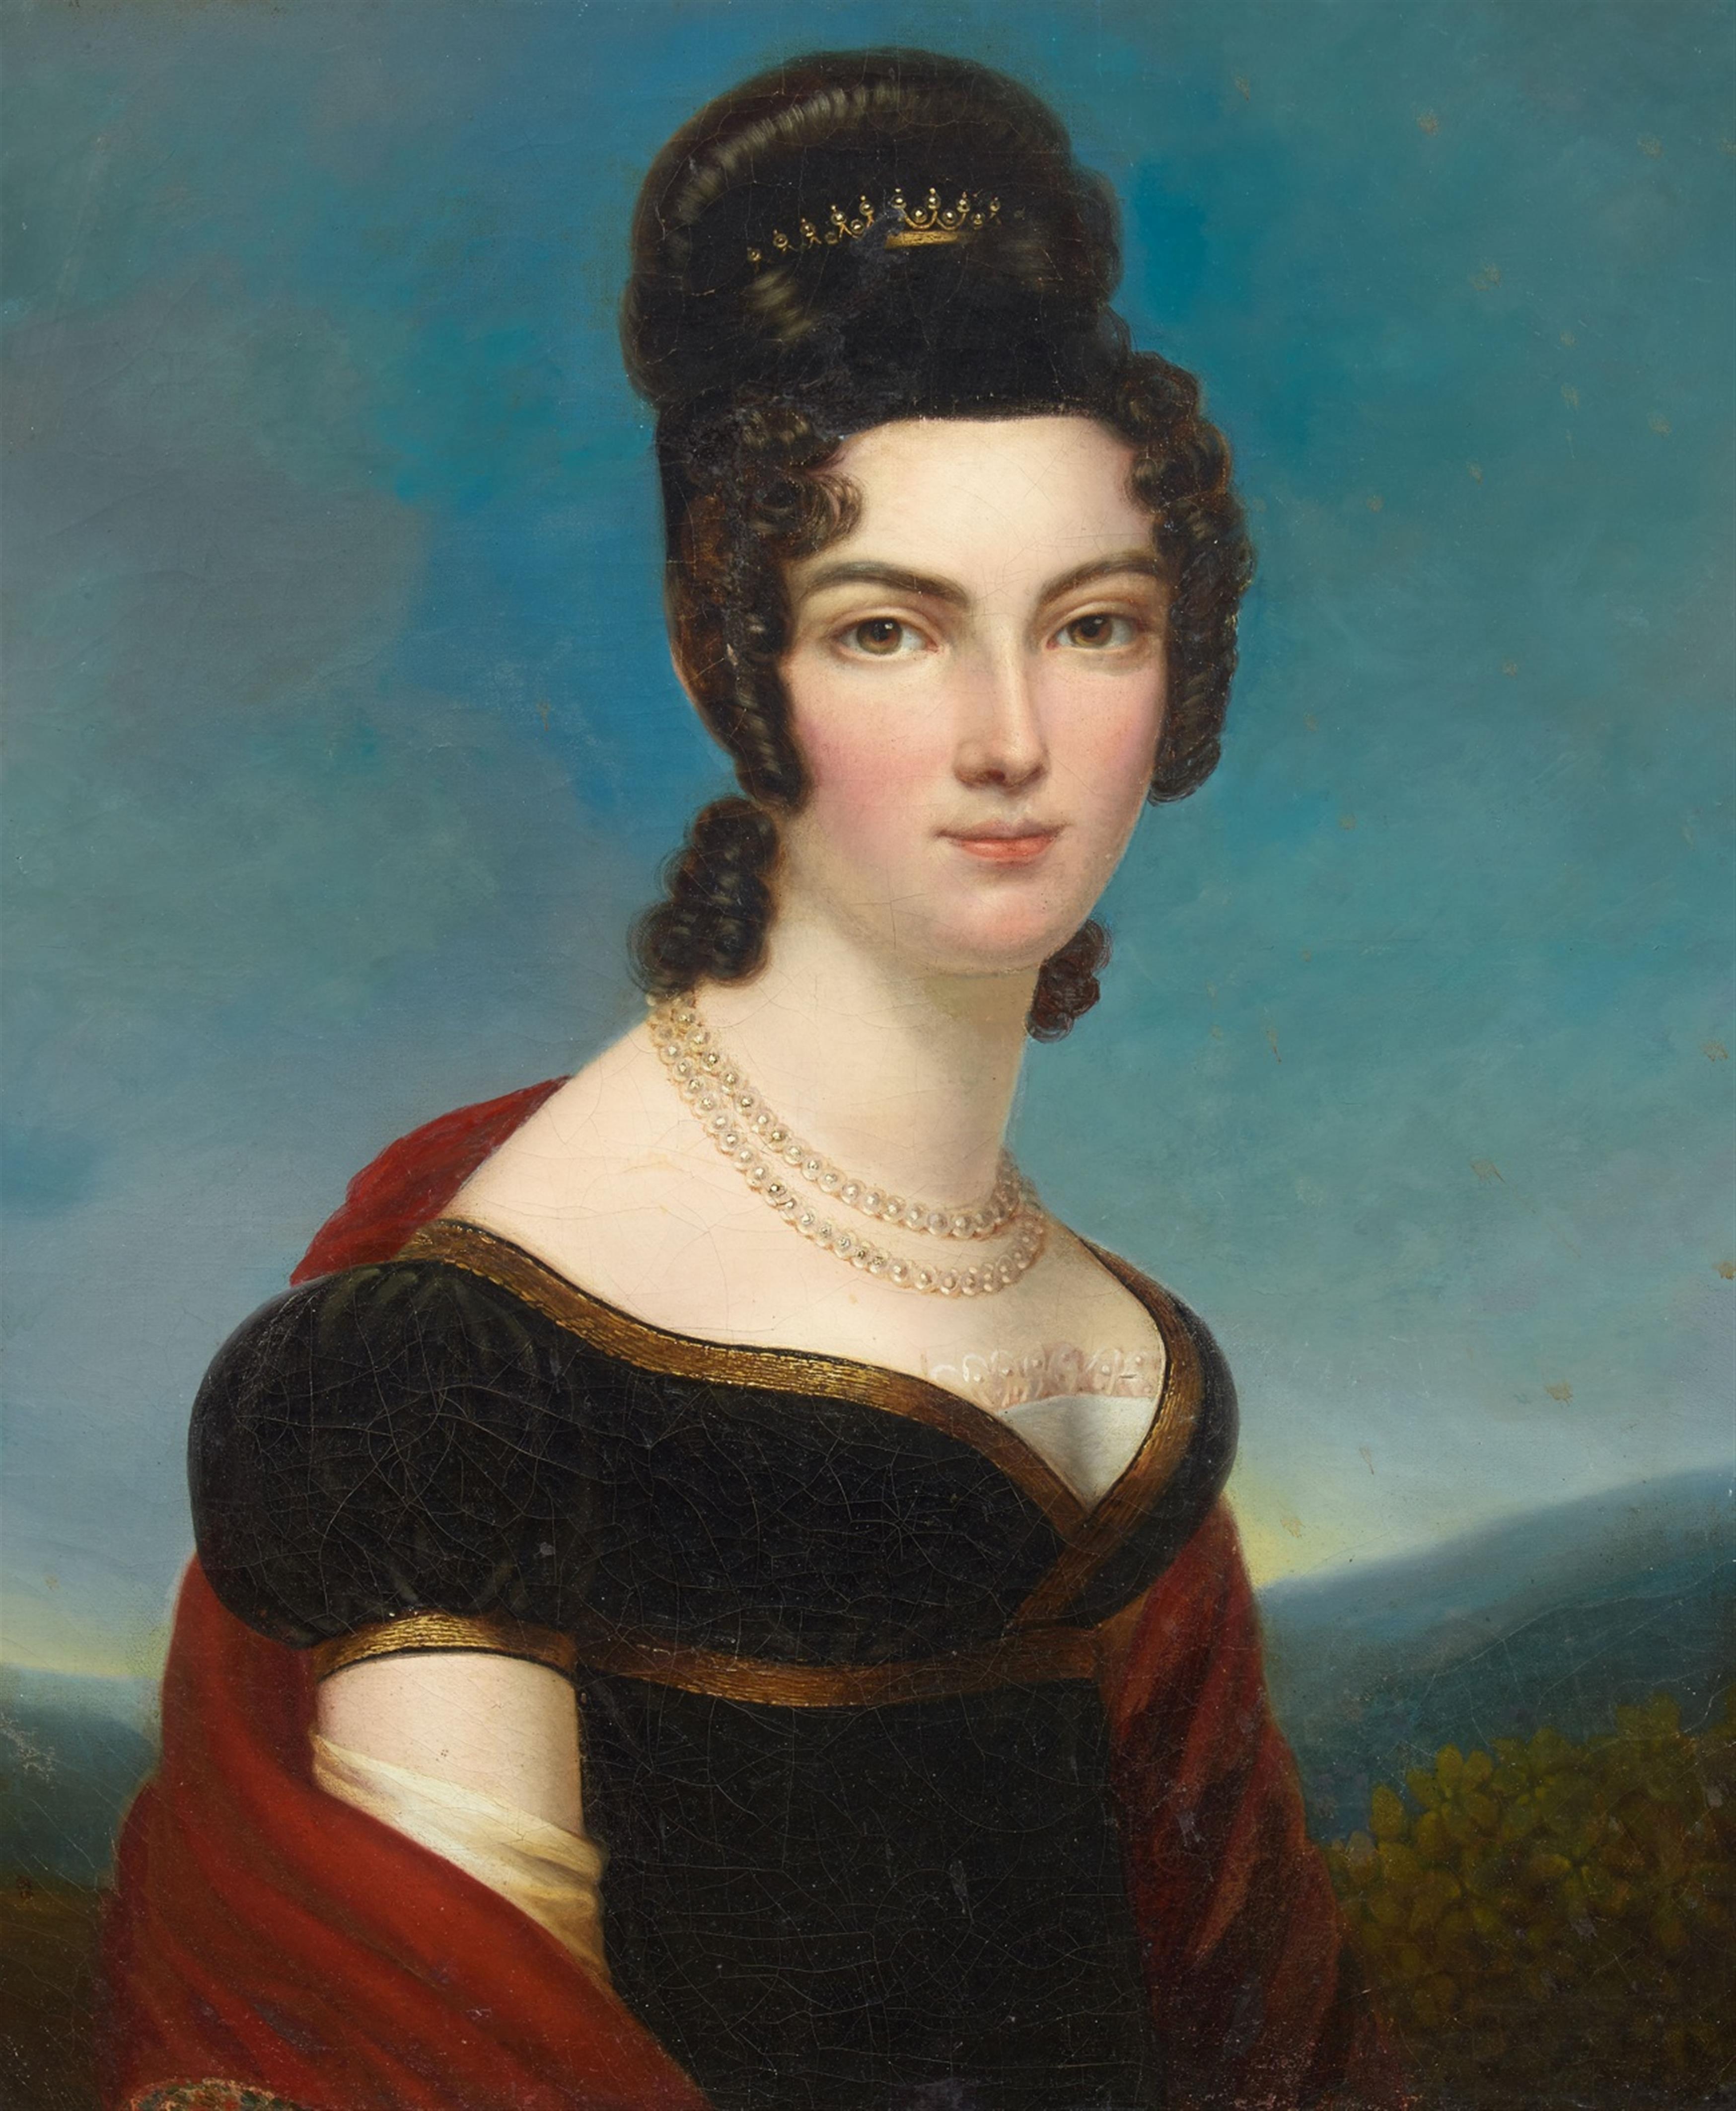 Unknown Artist circa 1810 / 1820 - Portrait of a Lady with an Elegant Hairstyle - image-1